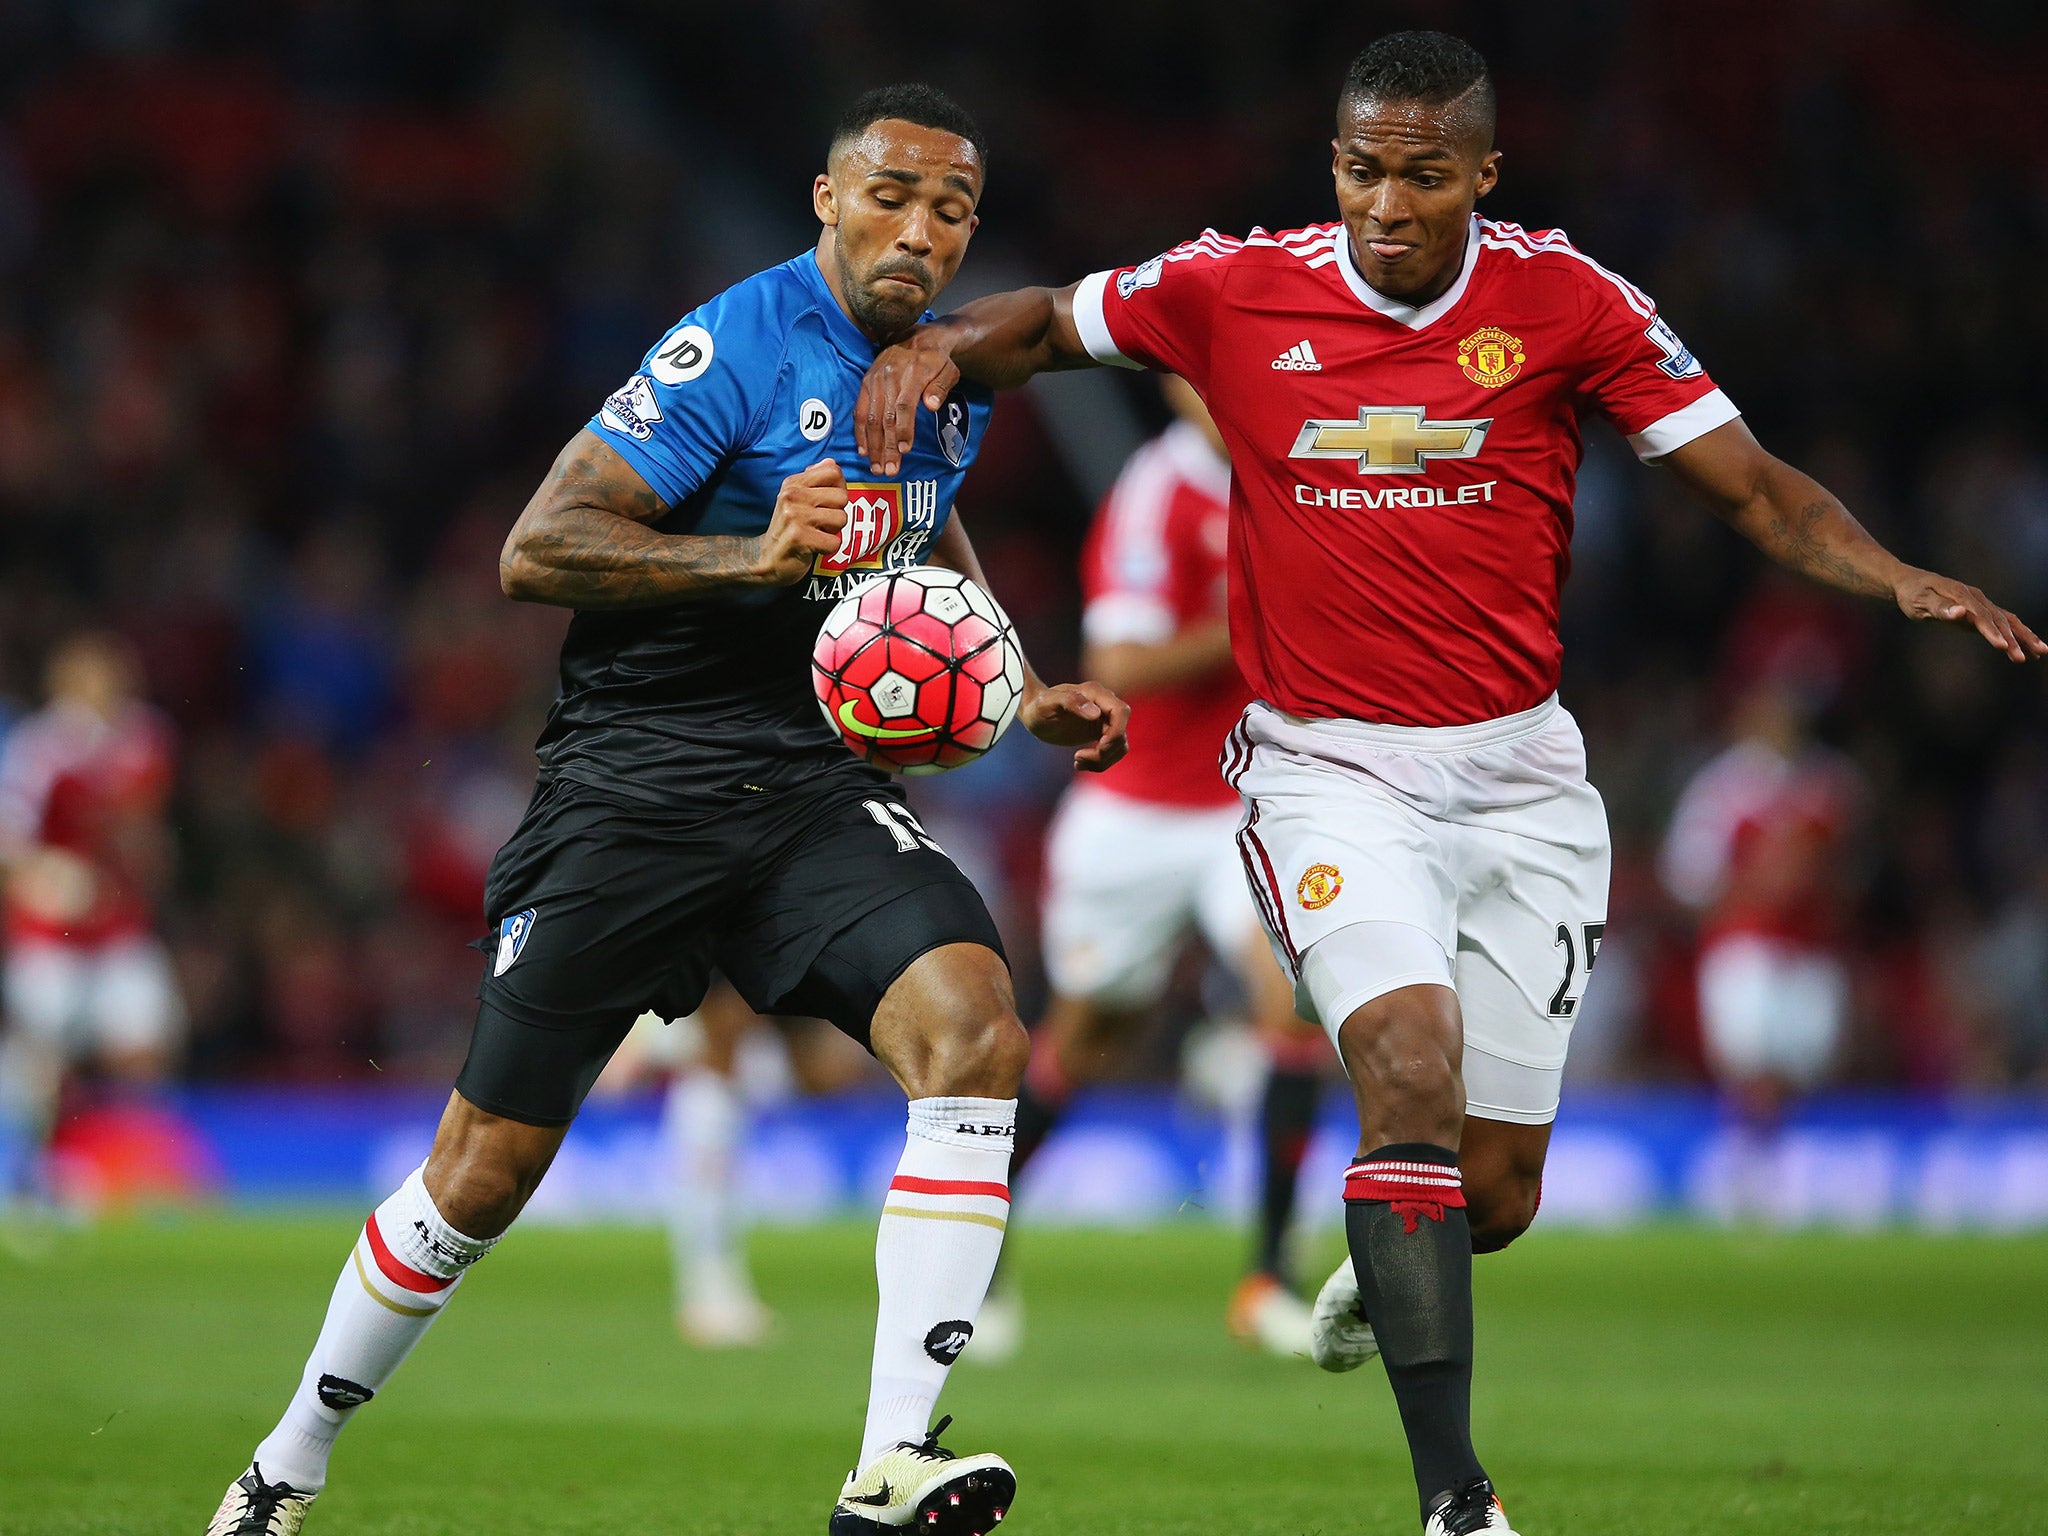 &#13;
Both Wilson and Ritchie faced United despite the transfer uncertainty &#13;